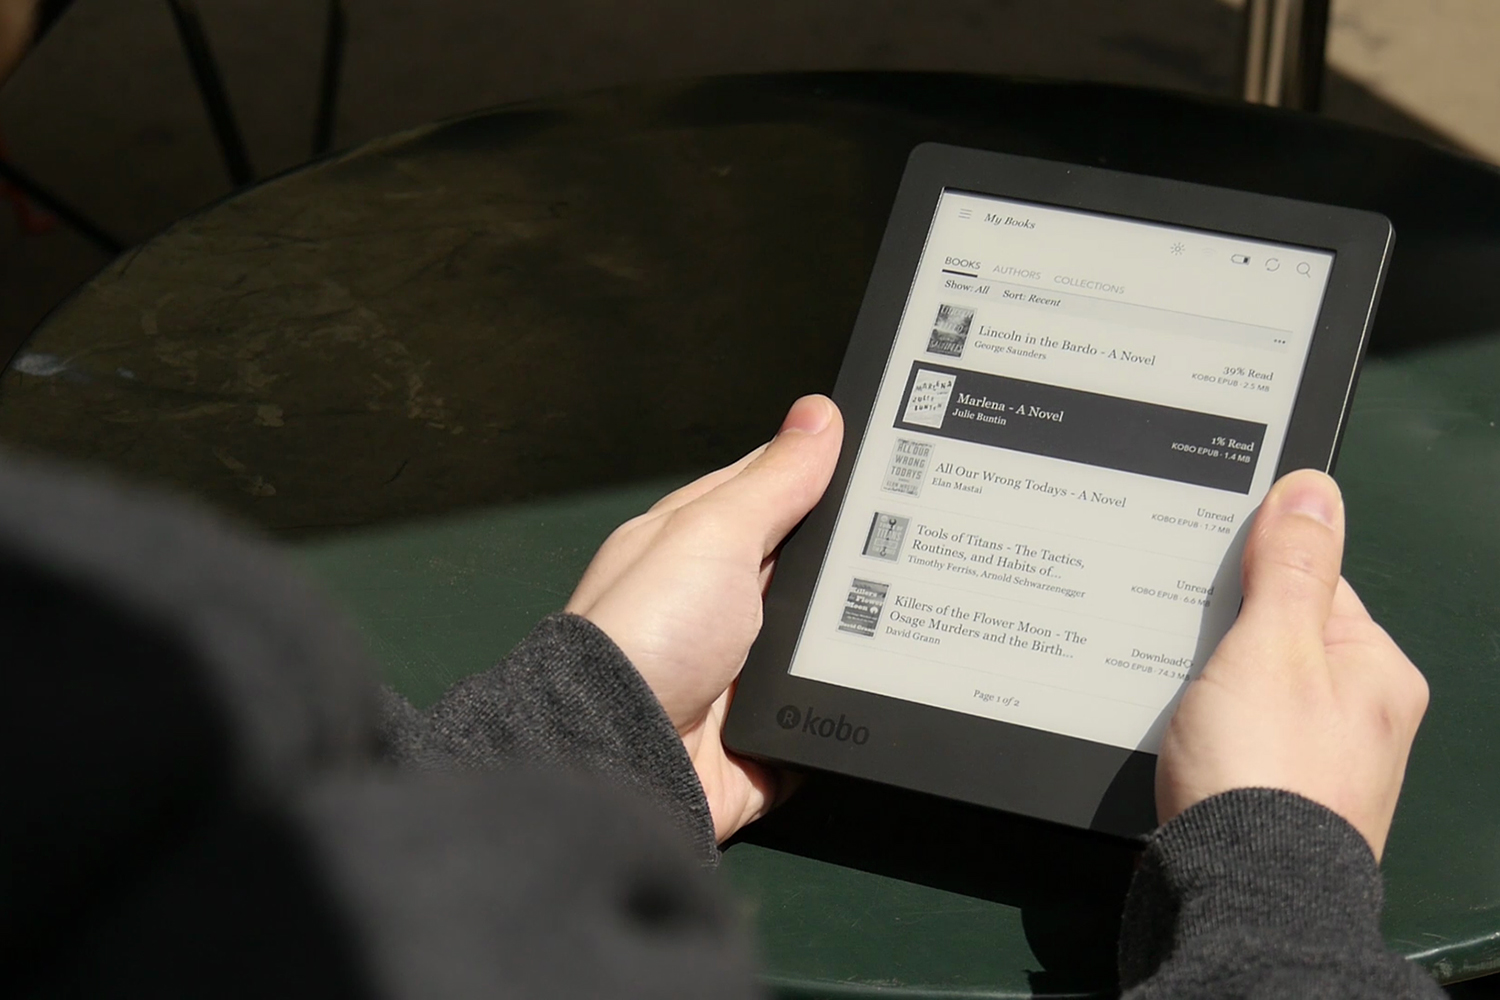 Review: Kobo E-Reader Touch Edition